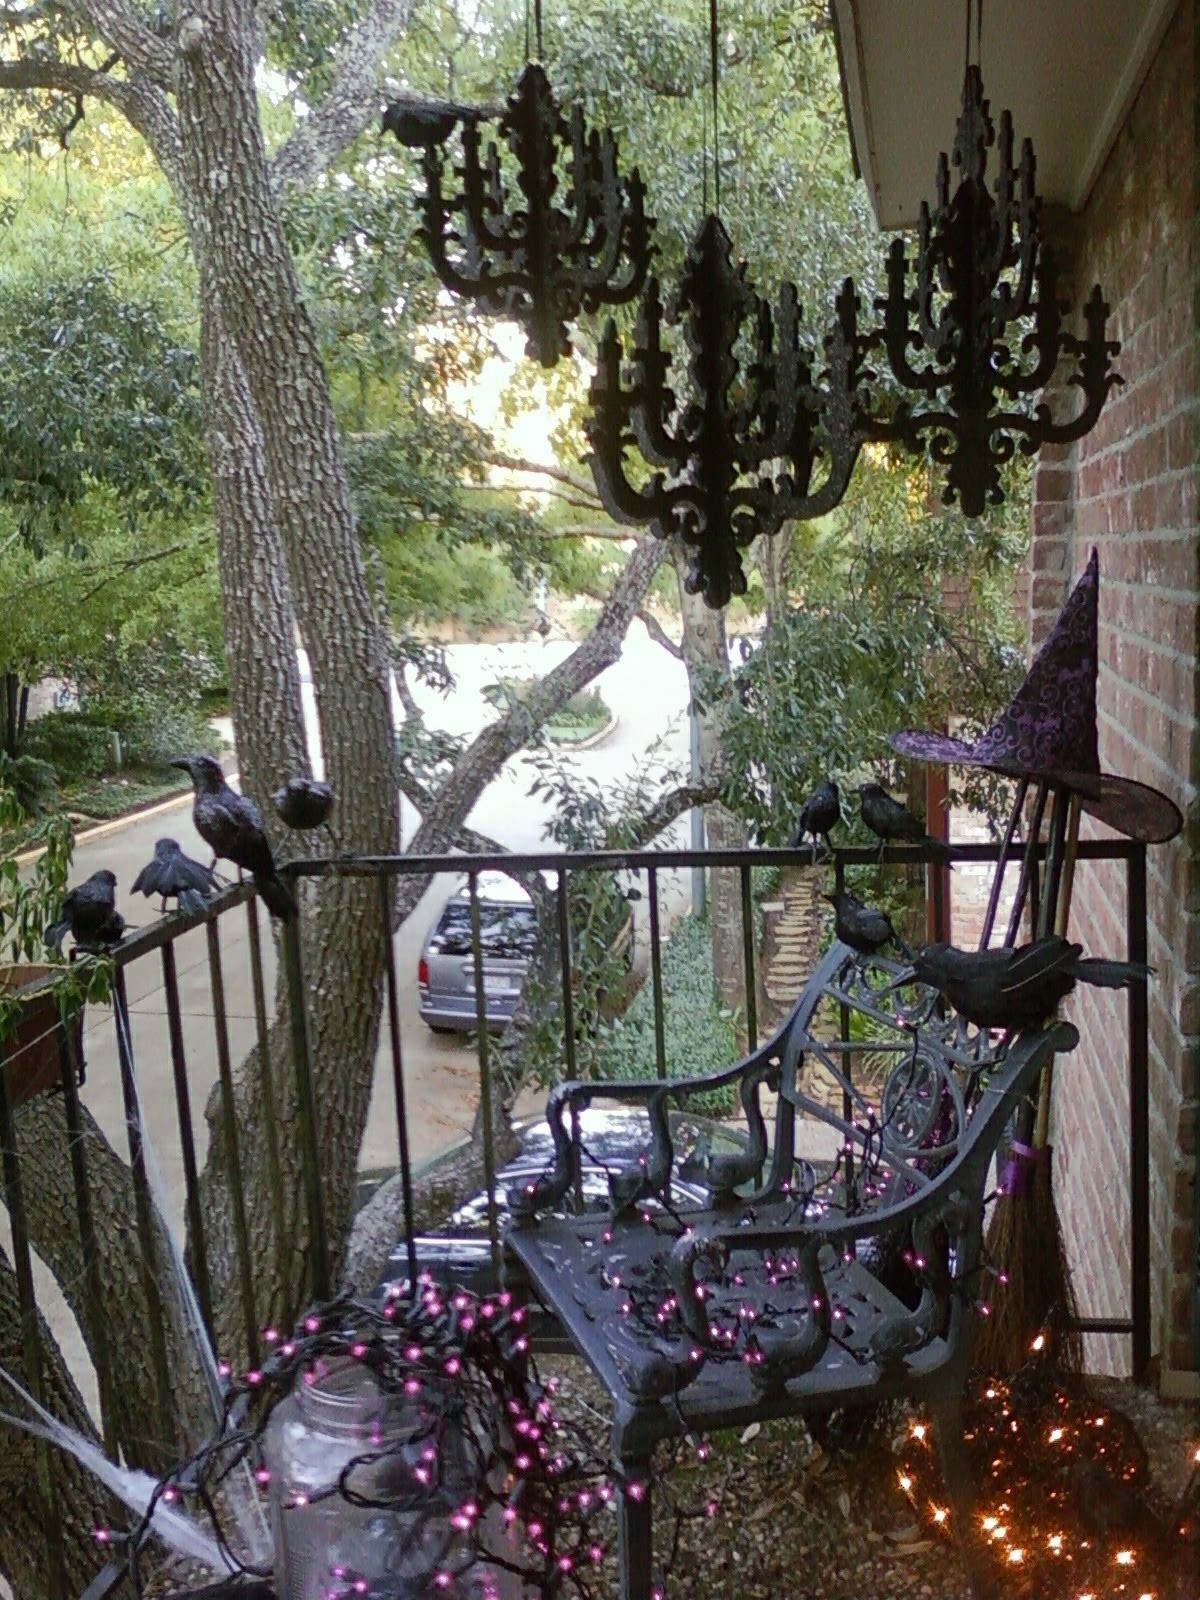 Apartment Balcony Halloween Decorations
 interior spaceLIFT iS Easy Halloween Decorating with